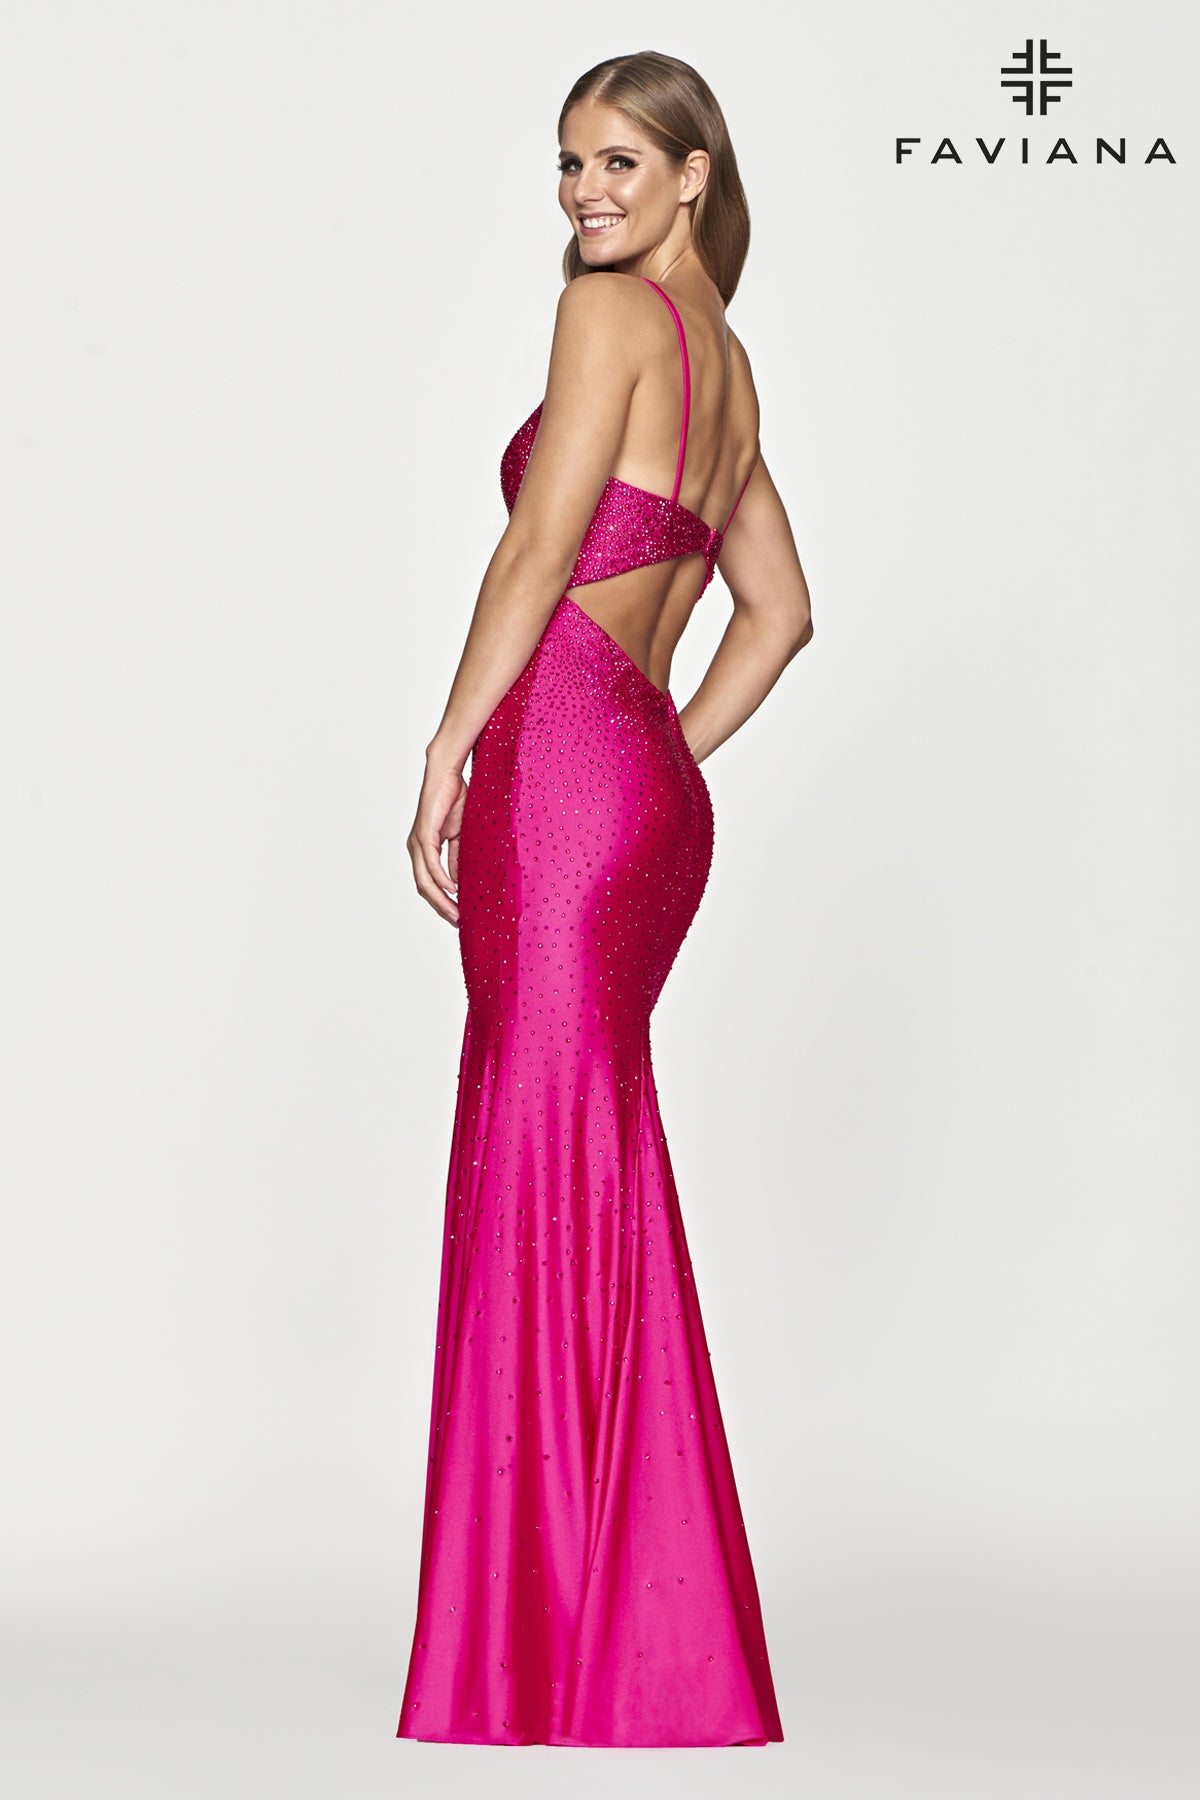 Faviana S10630 V-Neck Hot Stone Fitted Gown With Cut Out Back Detail | Hot Pink, Black, Sunburst Orange, Lilac